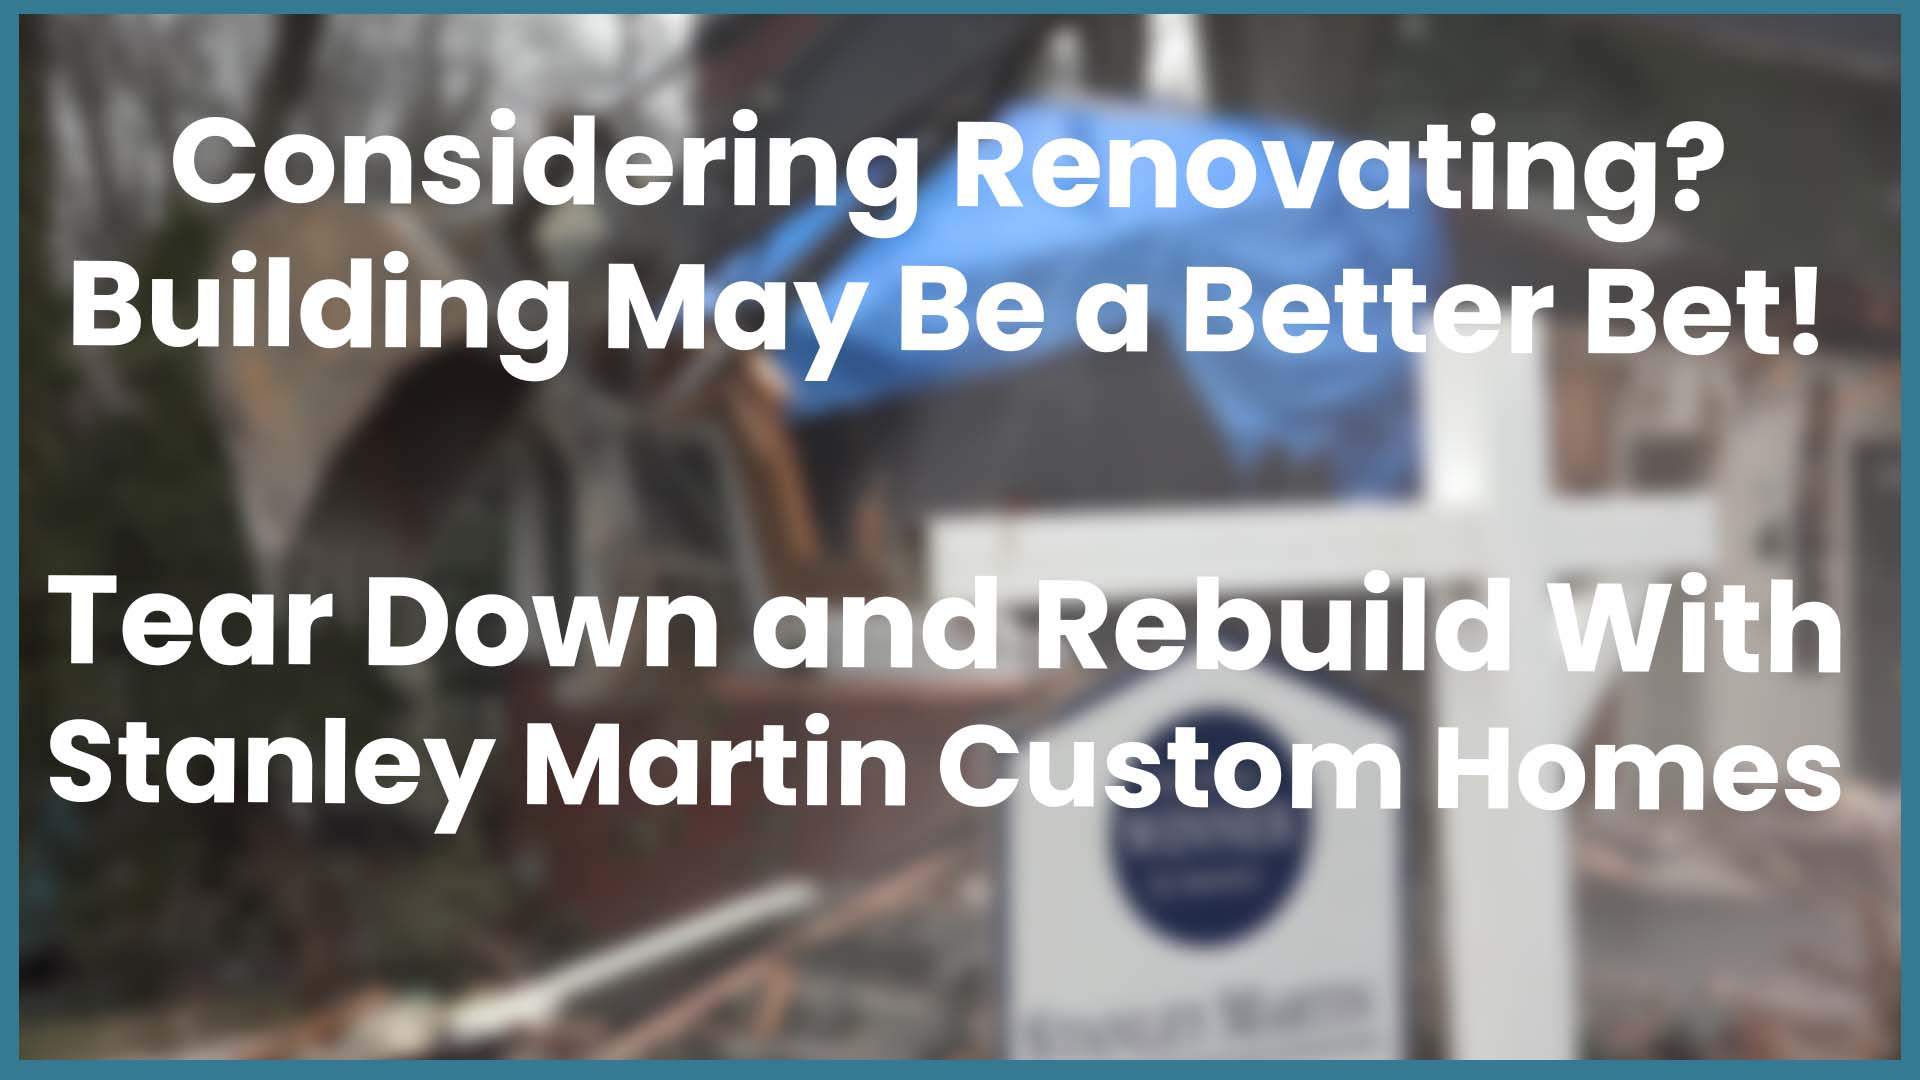 Considering Renovating? Building May Be a Better Bet!